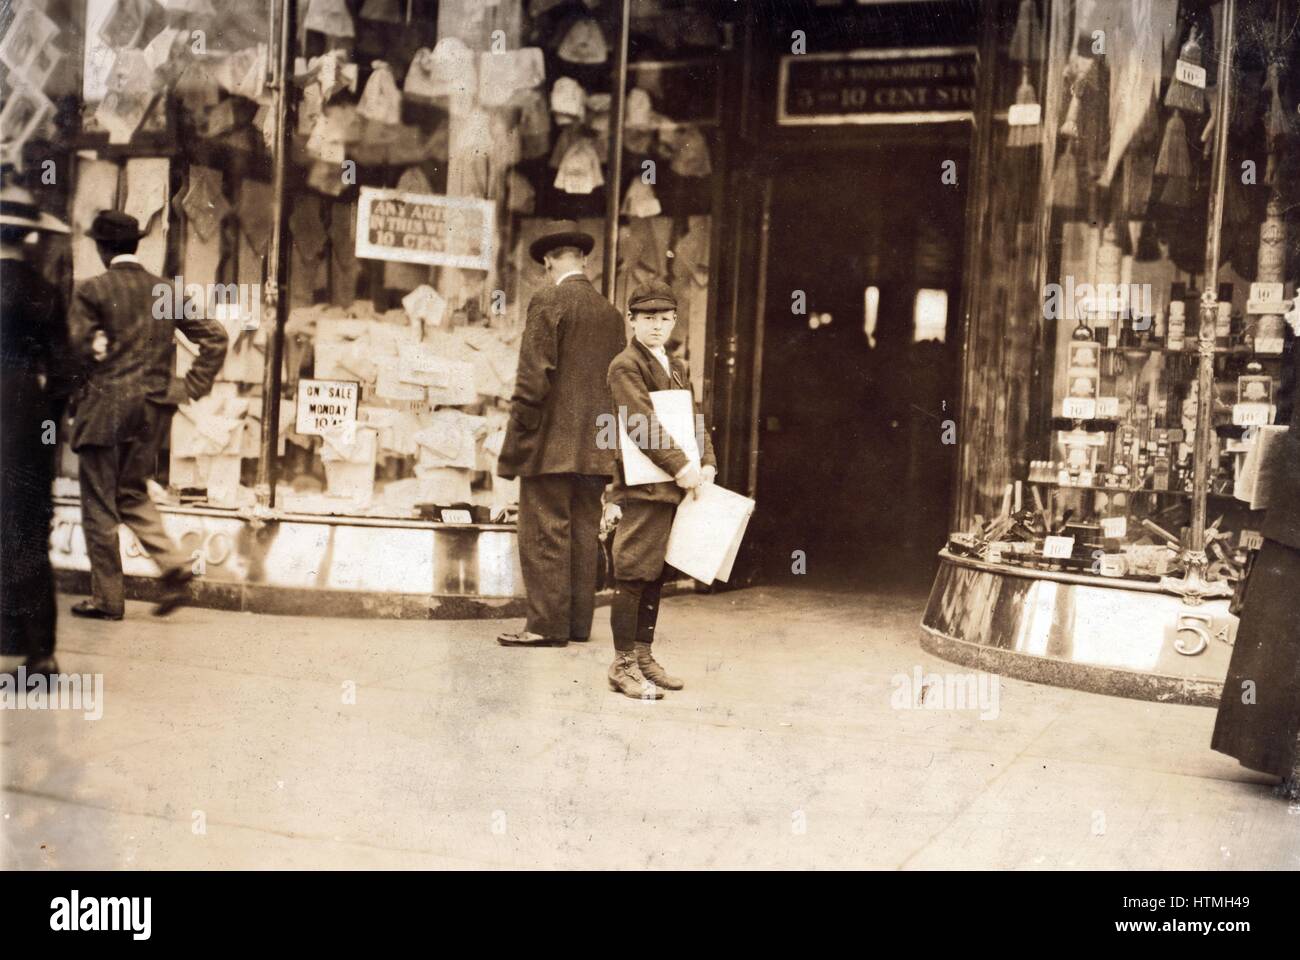 A young truant selling extras during school hours. Pennsylvania Avenue New York 1911 Stock Photo